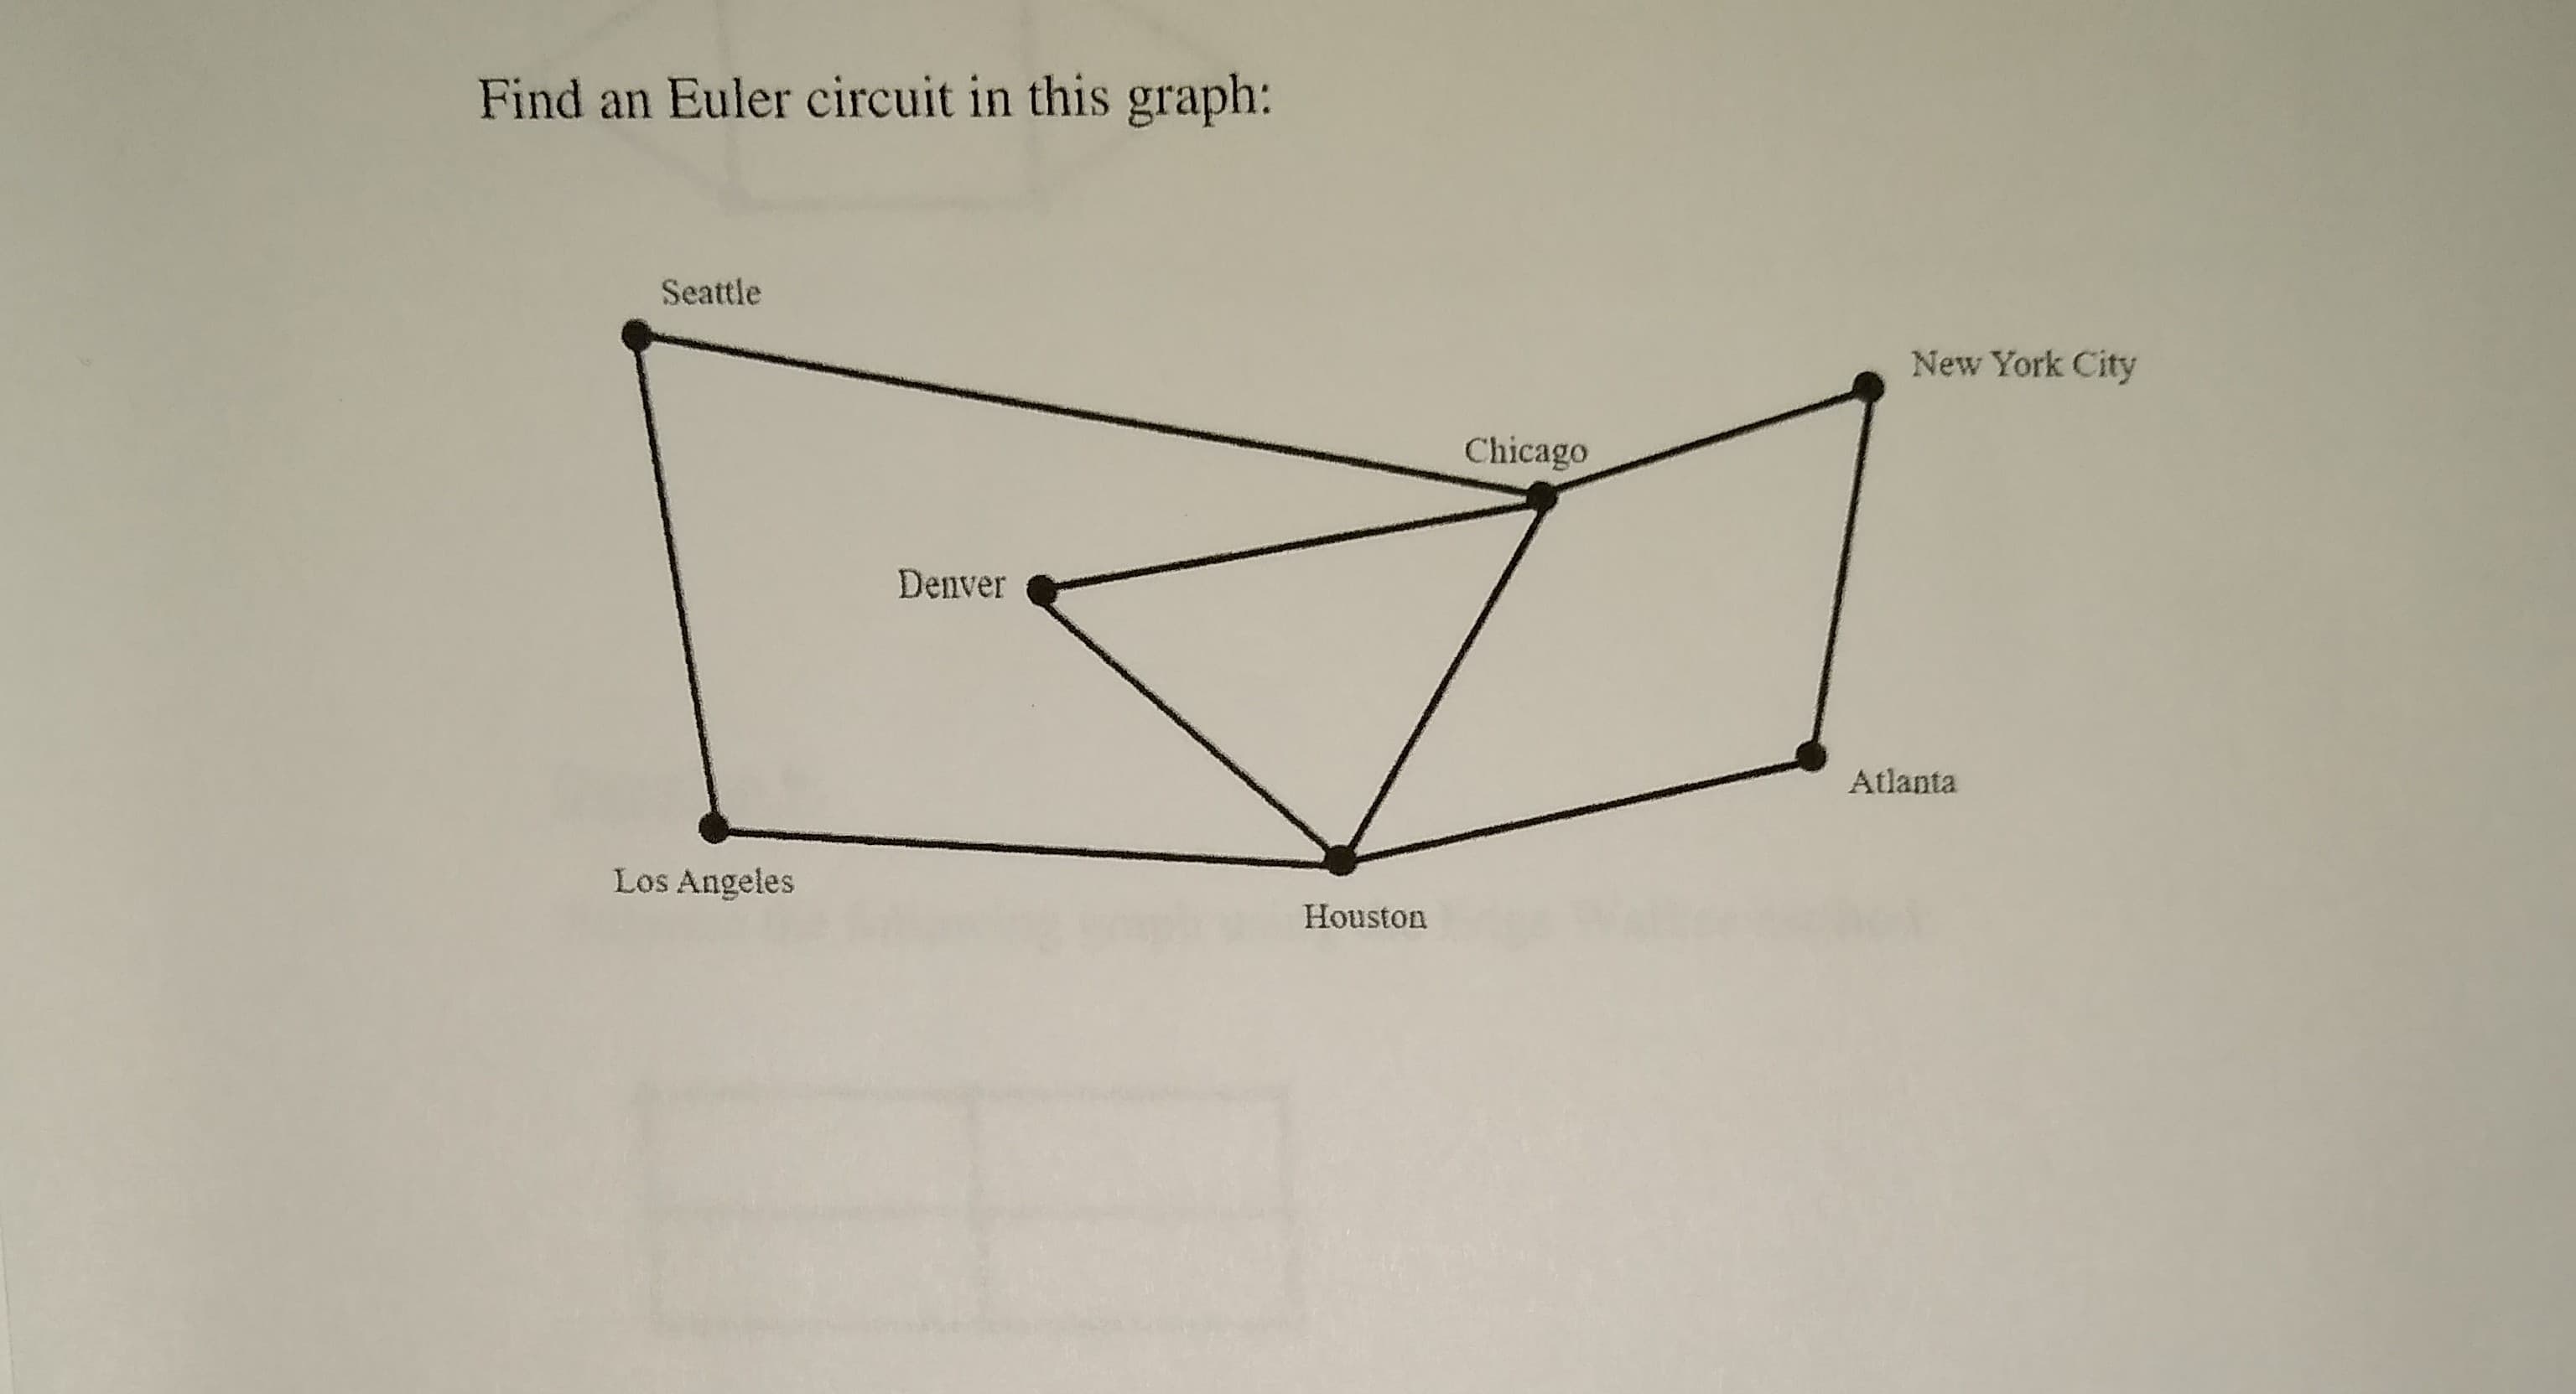 Find an Euler circuit in this graph:
Seattle
New York City
Chicago
Denver
Atlanta
Los Angeles
Houston
